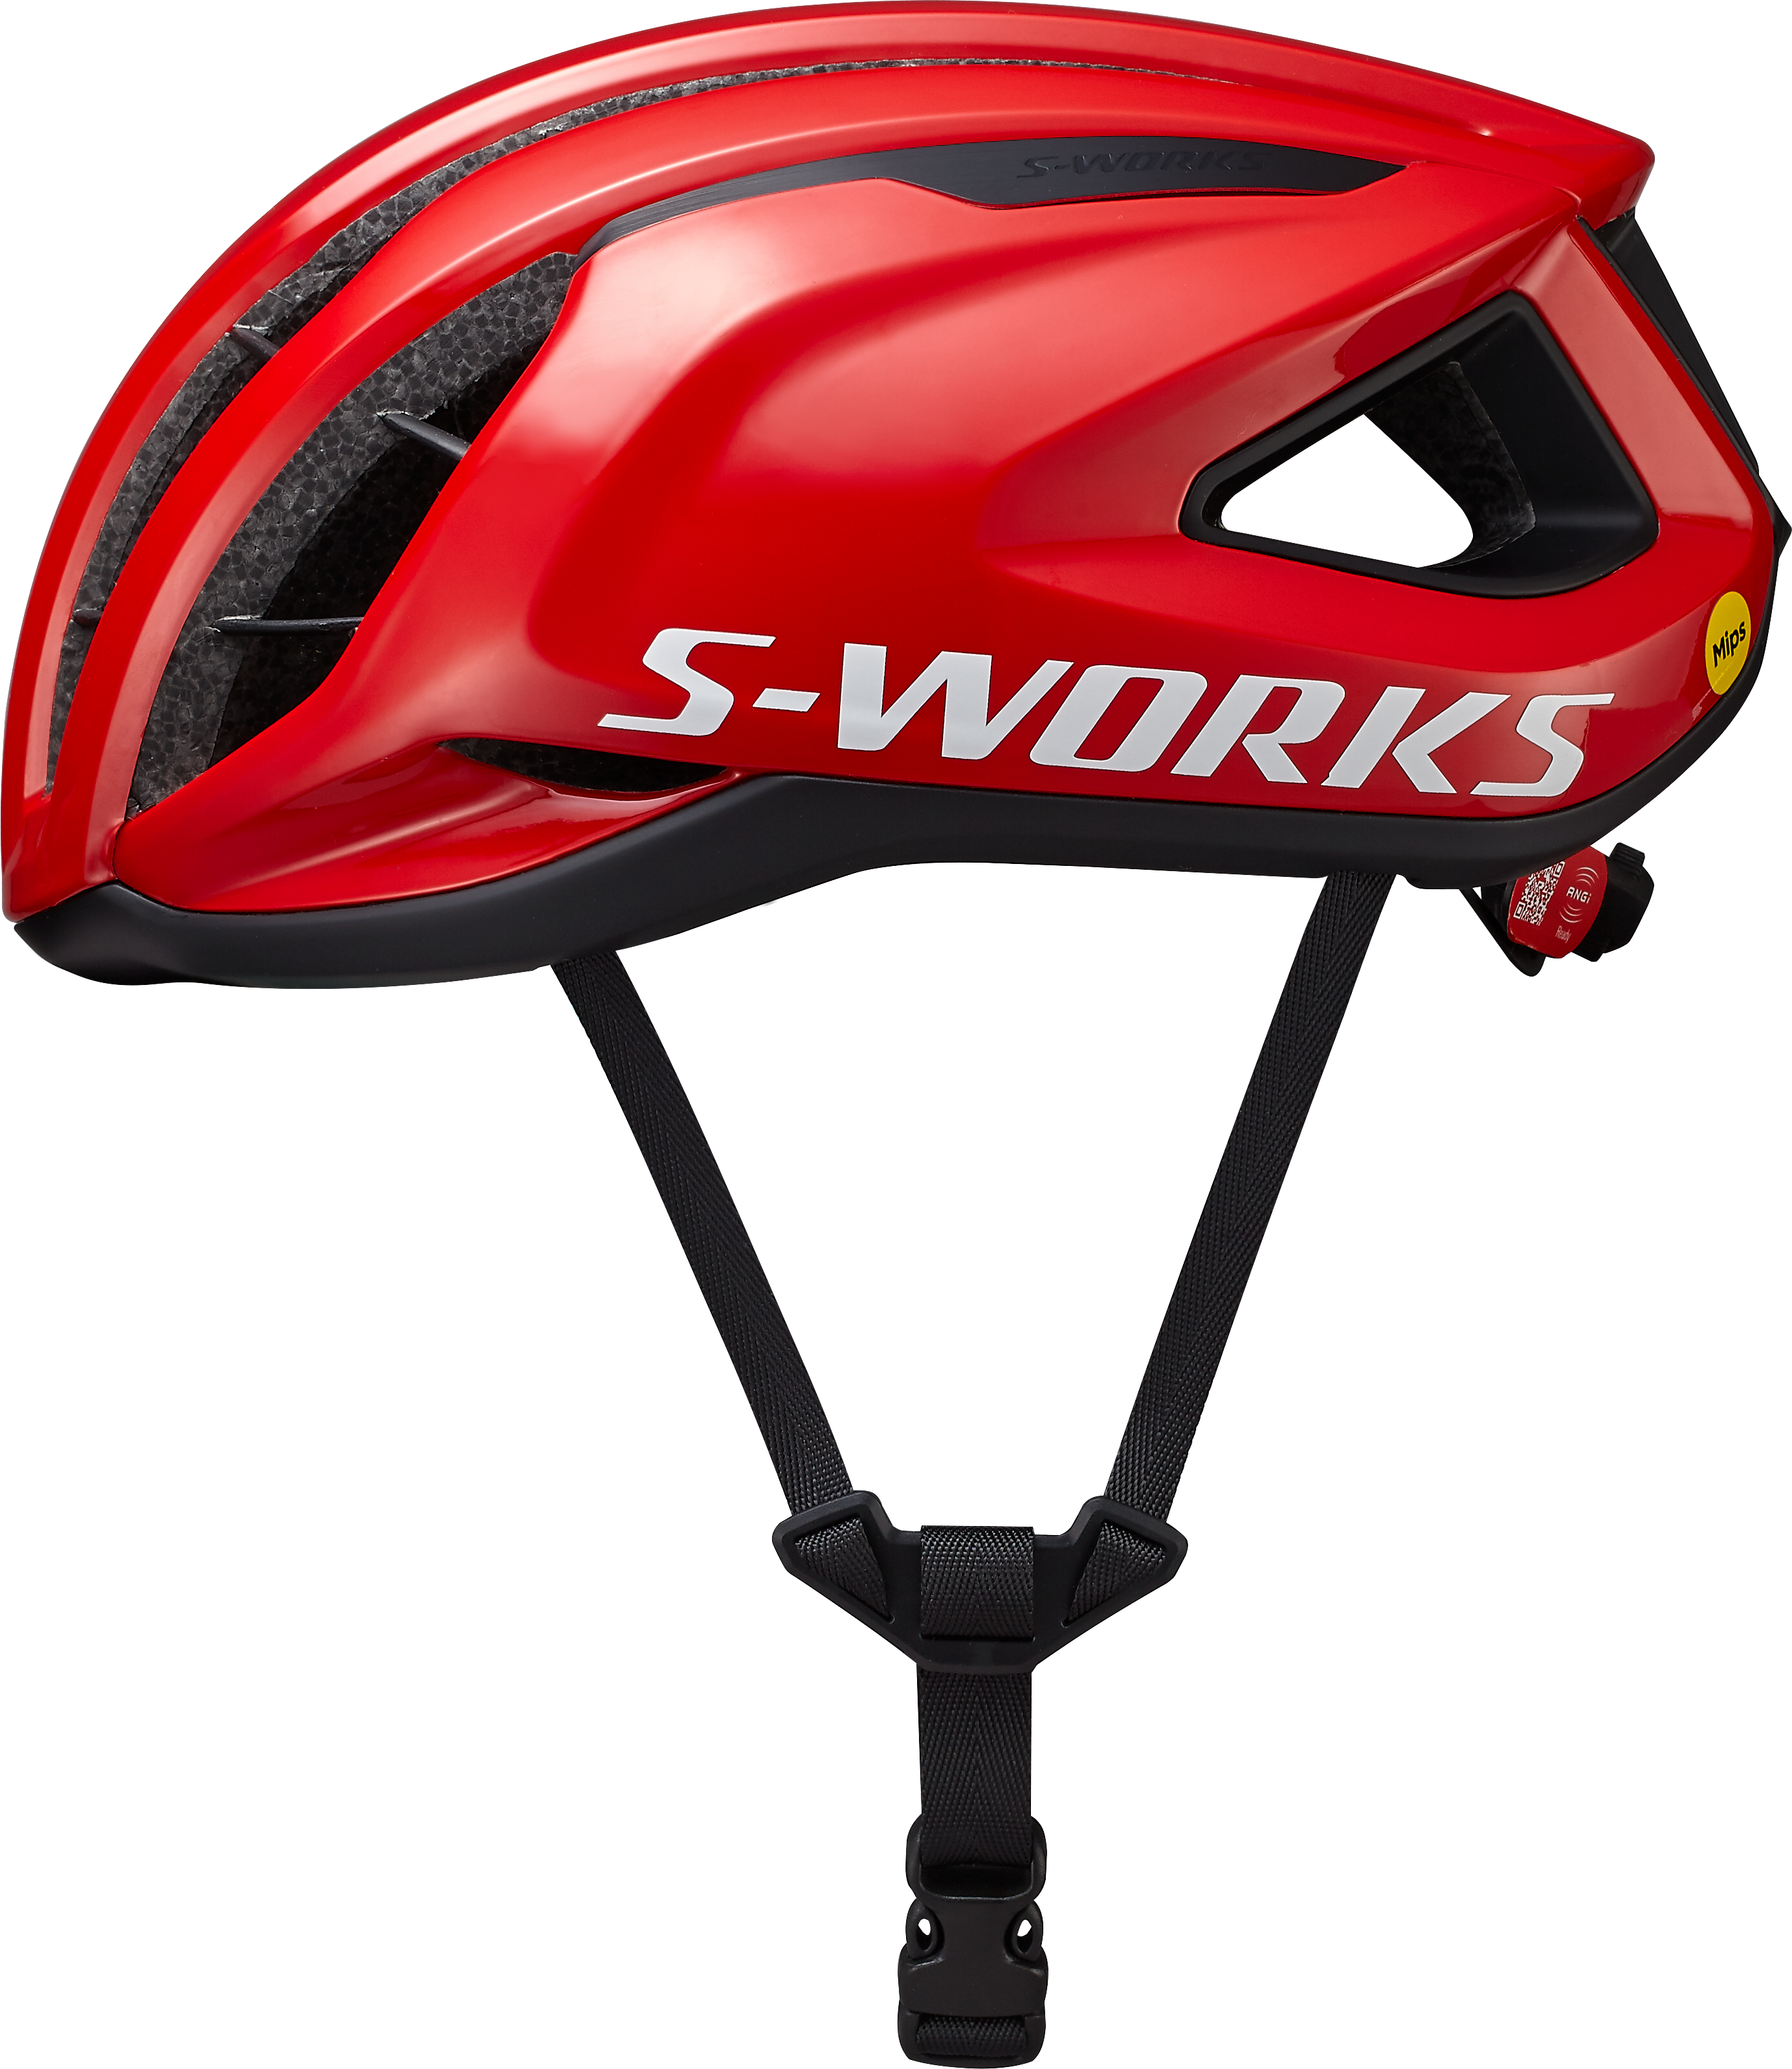 S-WORKS PREVAIL 3  ヘルメット　スペシャライズド　ロードバイク値段を変更致します